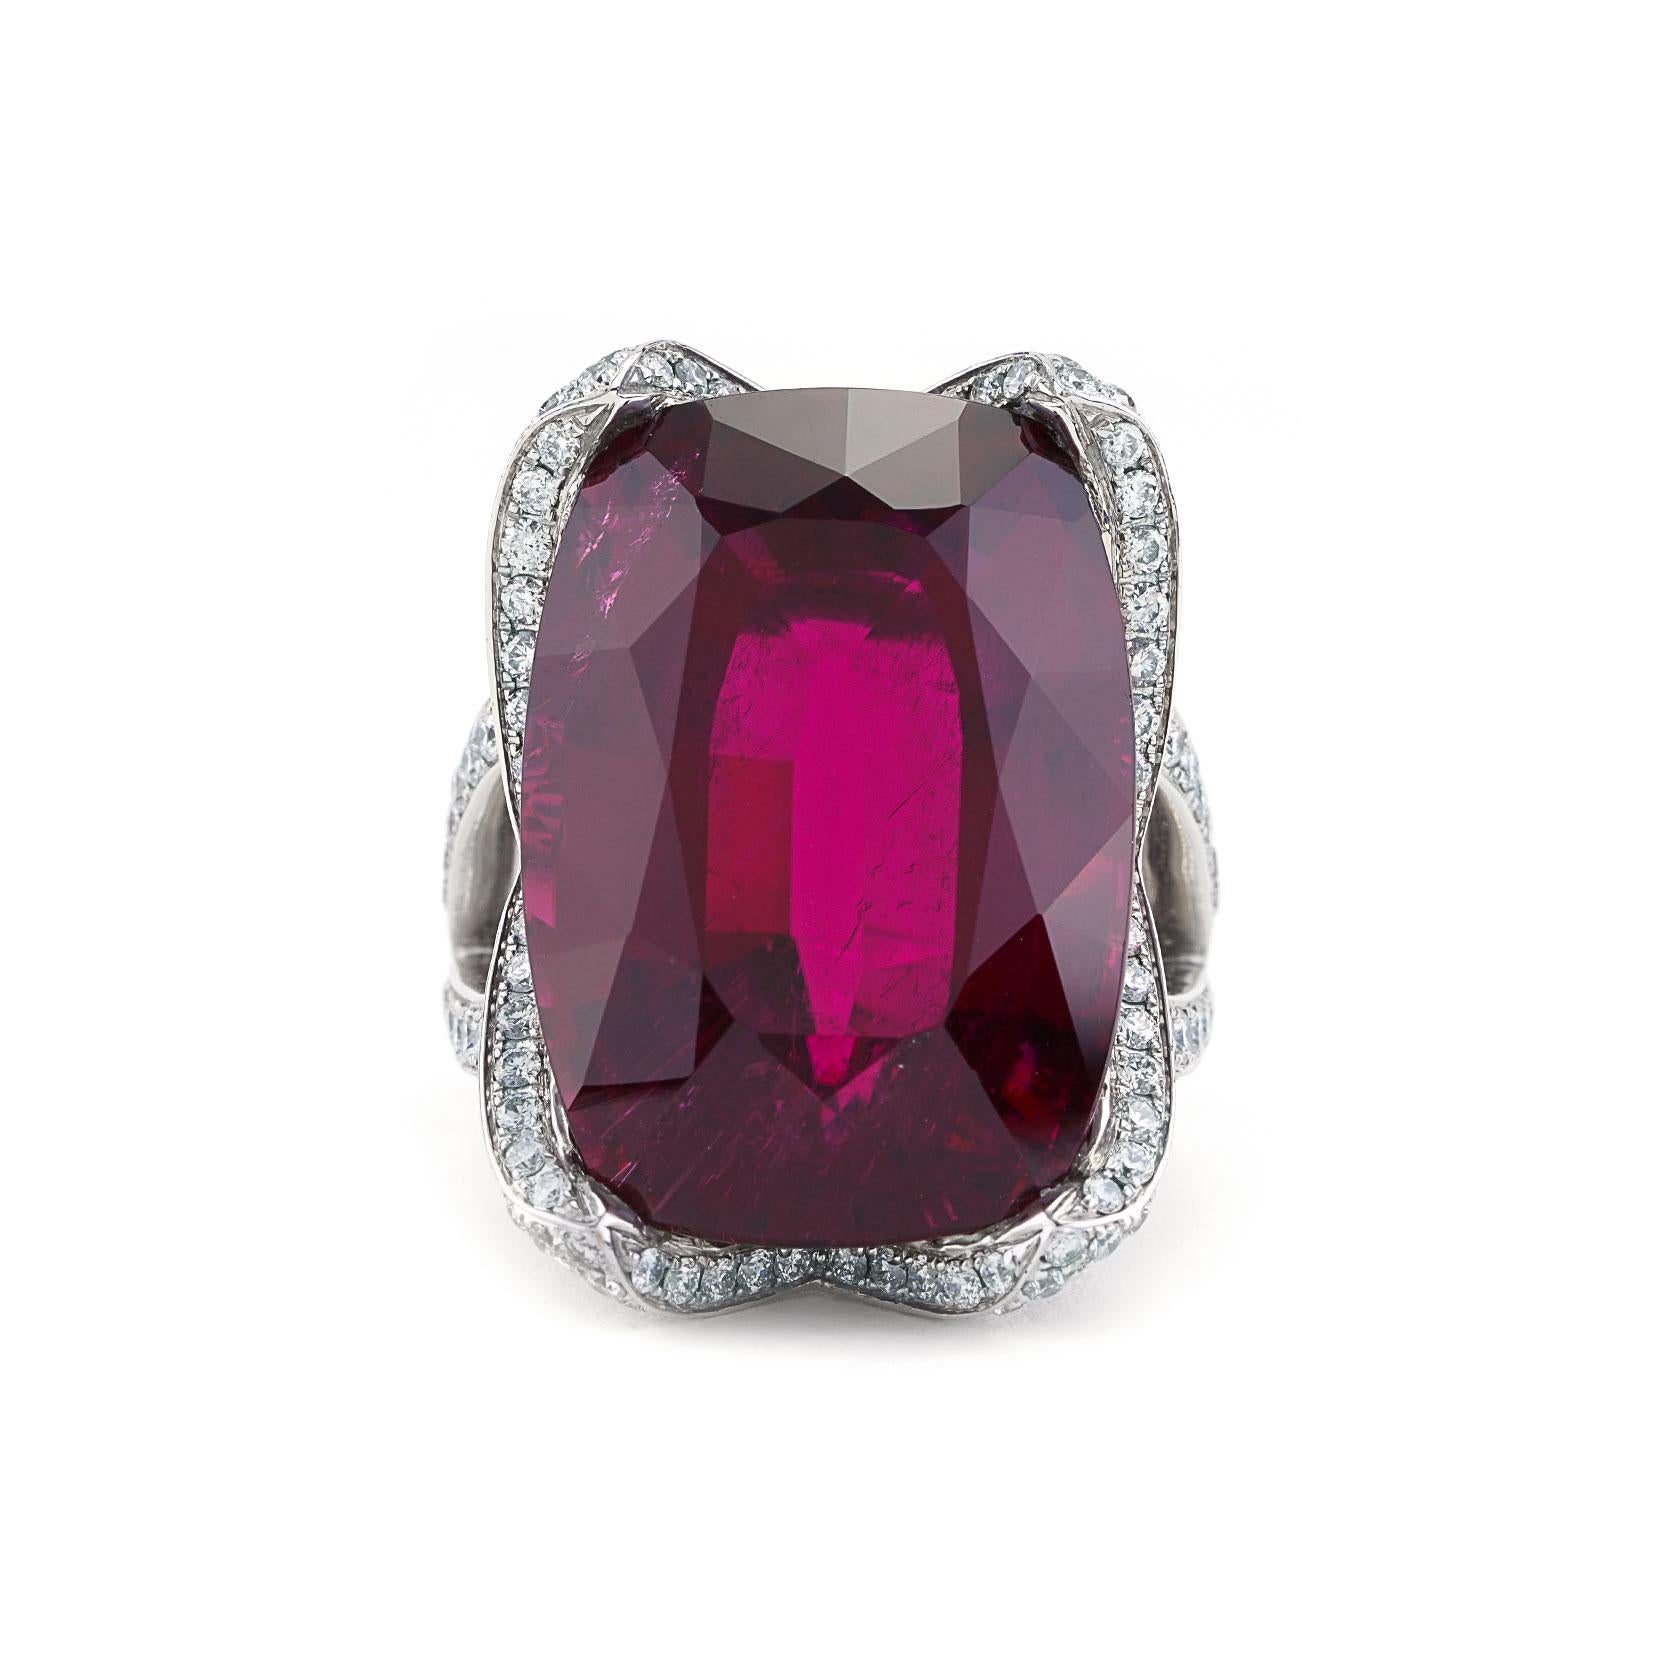 Introducing a breathtaking masterpiece of elegance, this exquisite ring features a very rare 38.21 carat rubellite as its centerpiece. Sourced from the renowned Cruzeiro Mine in Brazil, this unique tourmaline exhibits an intense red hue reminiscent